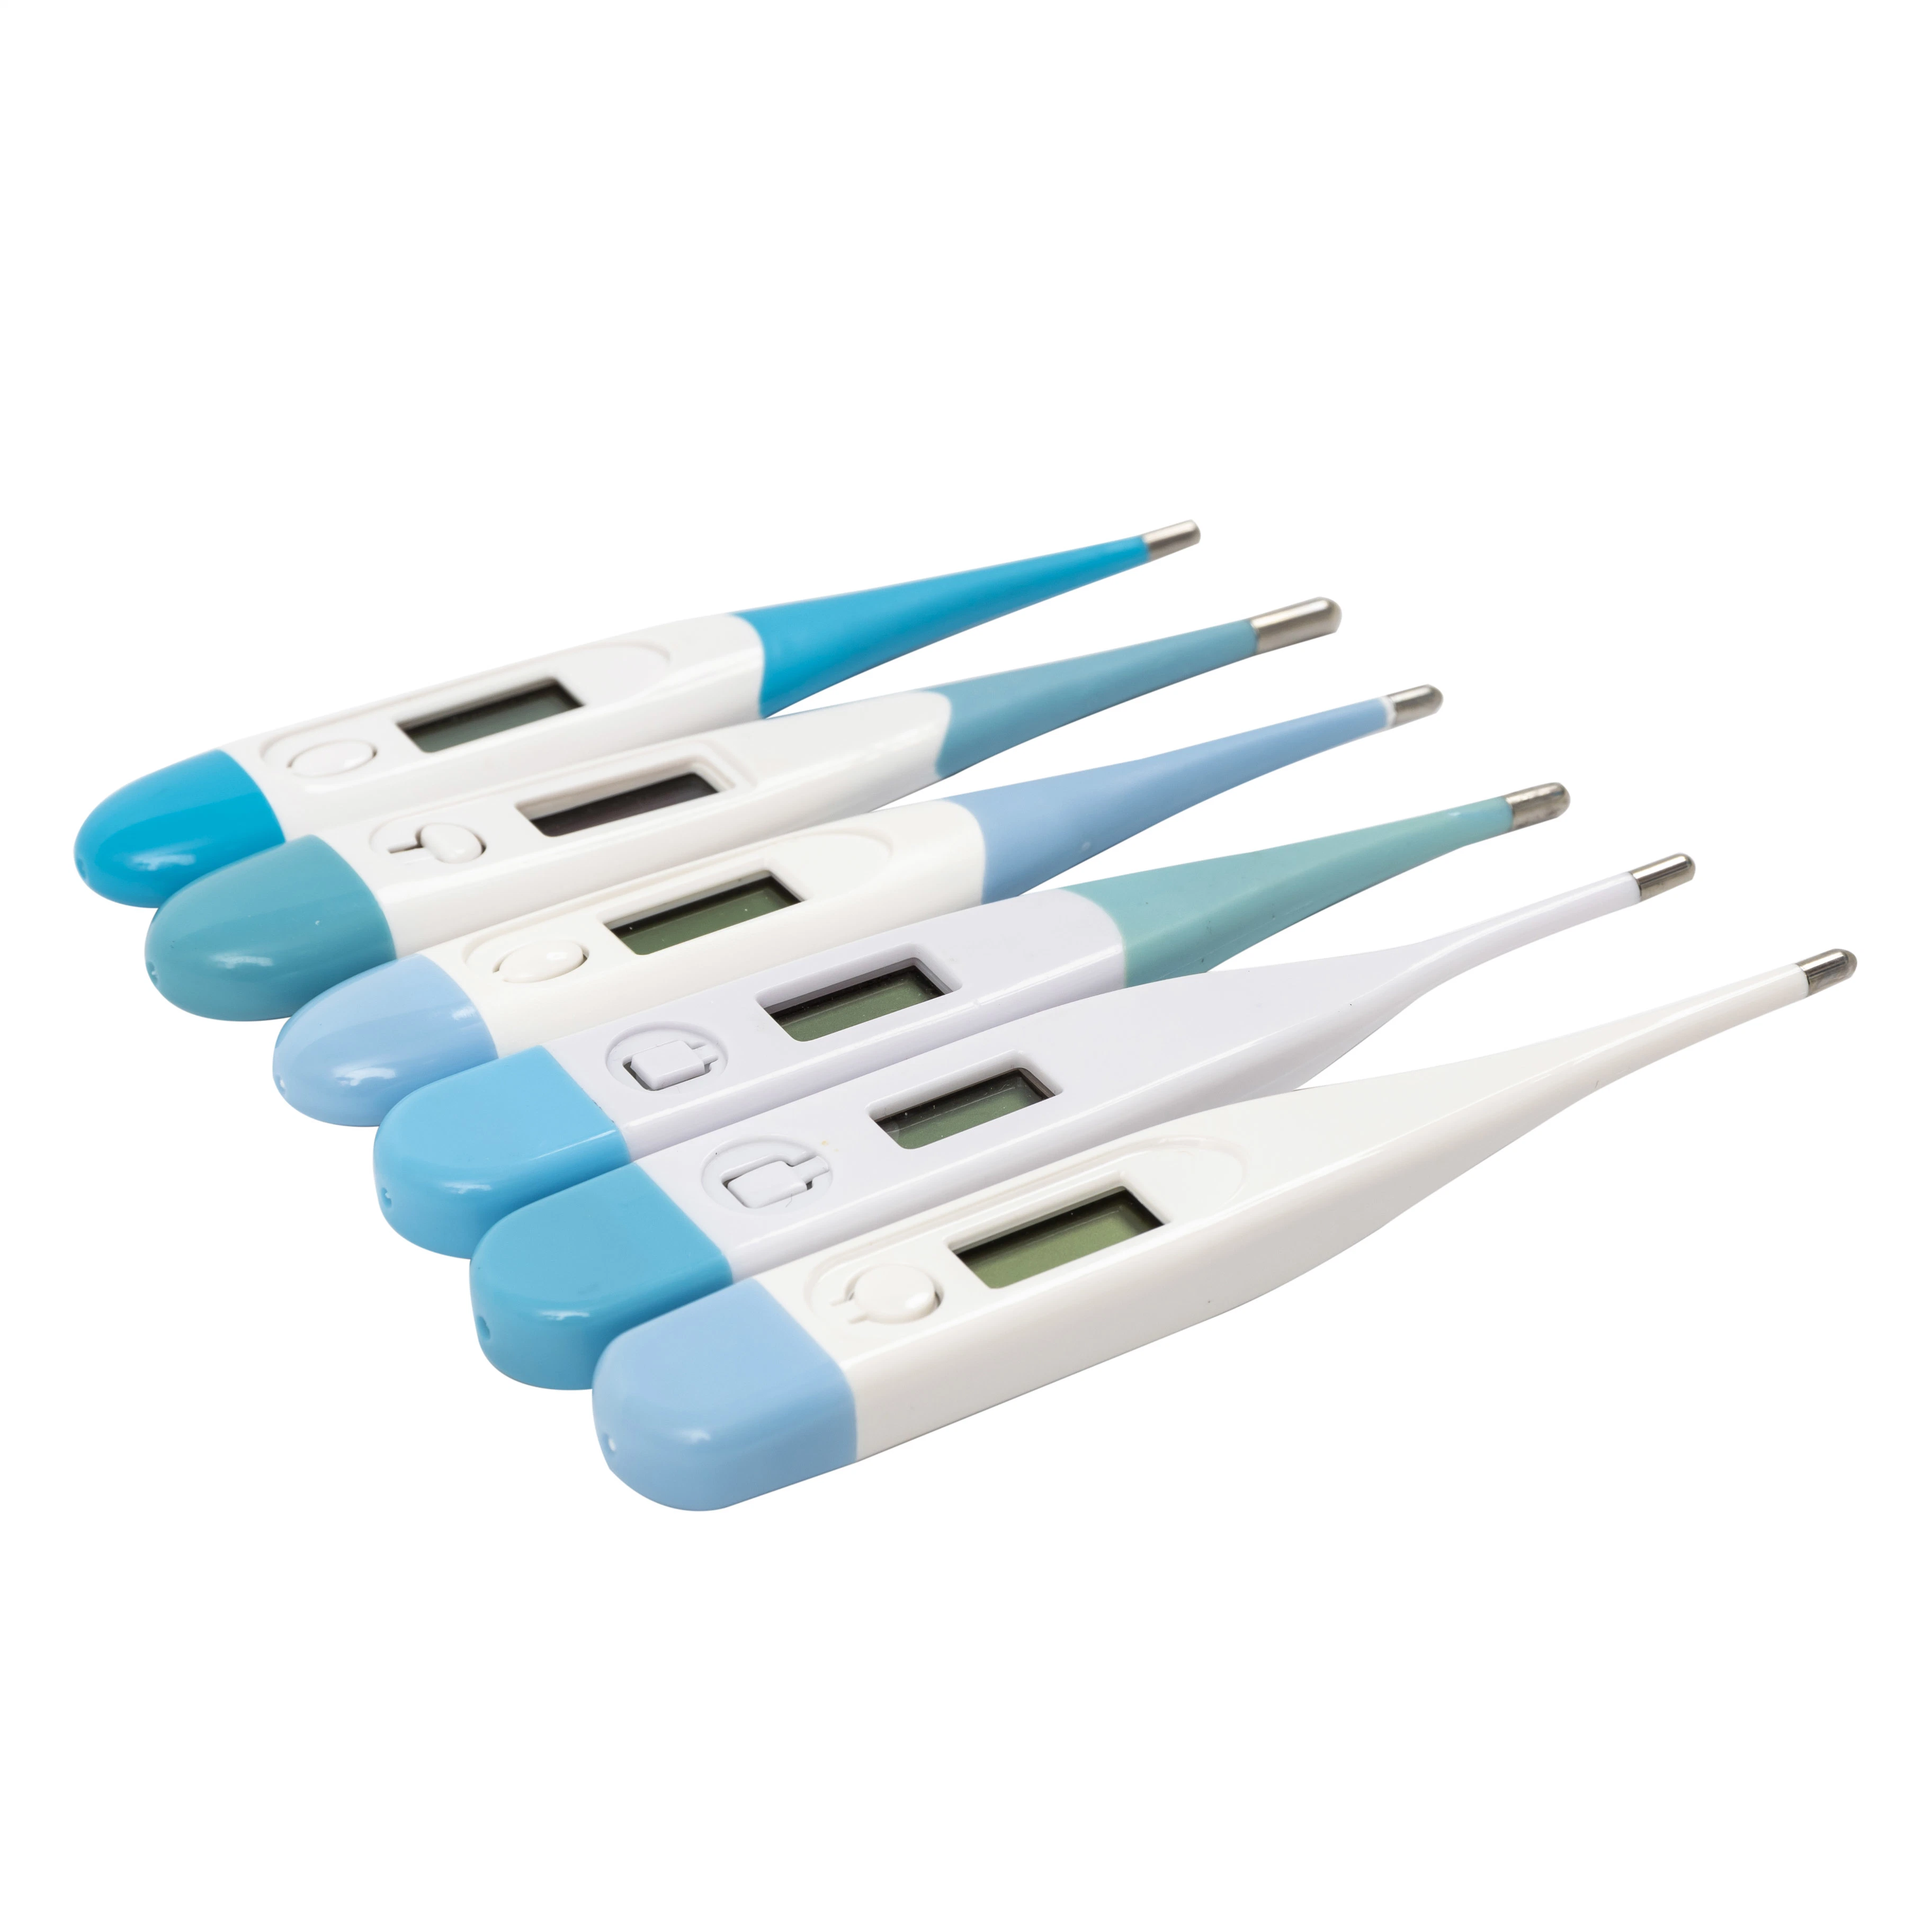 Adults Using Child Electronic Medical Digital Thermometer